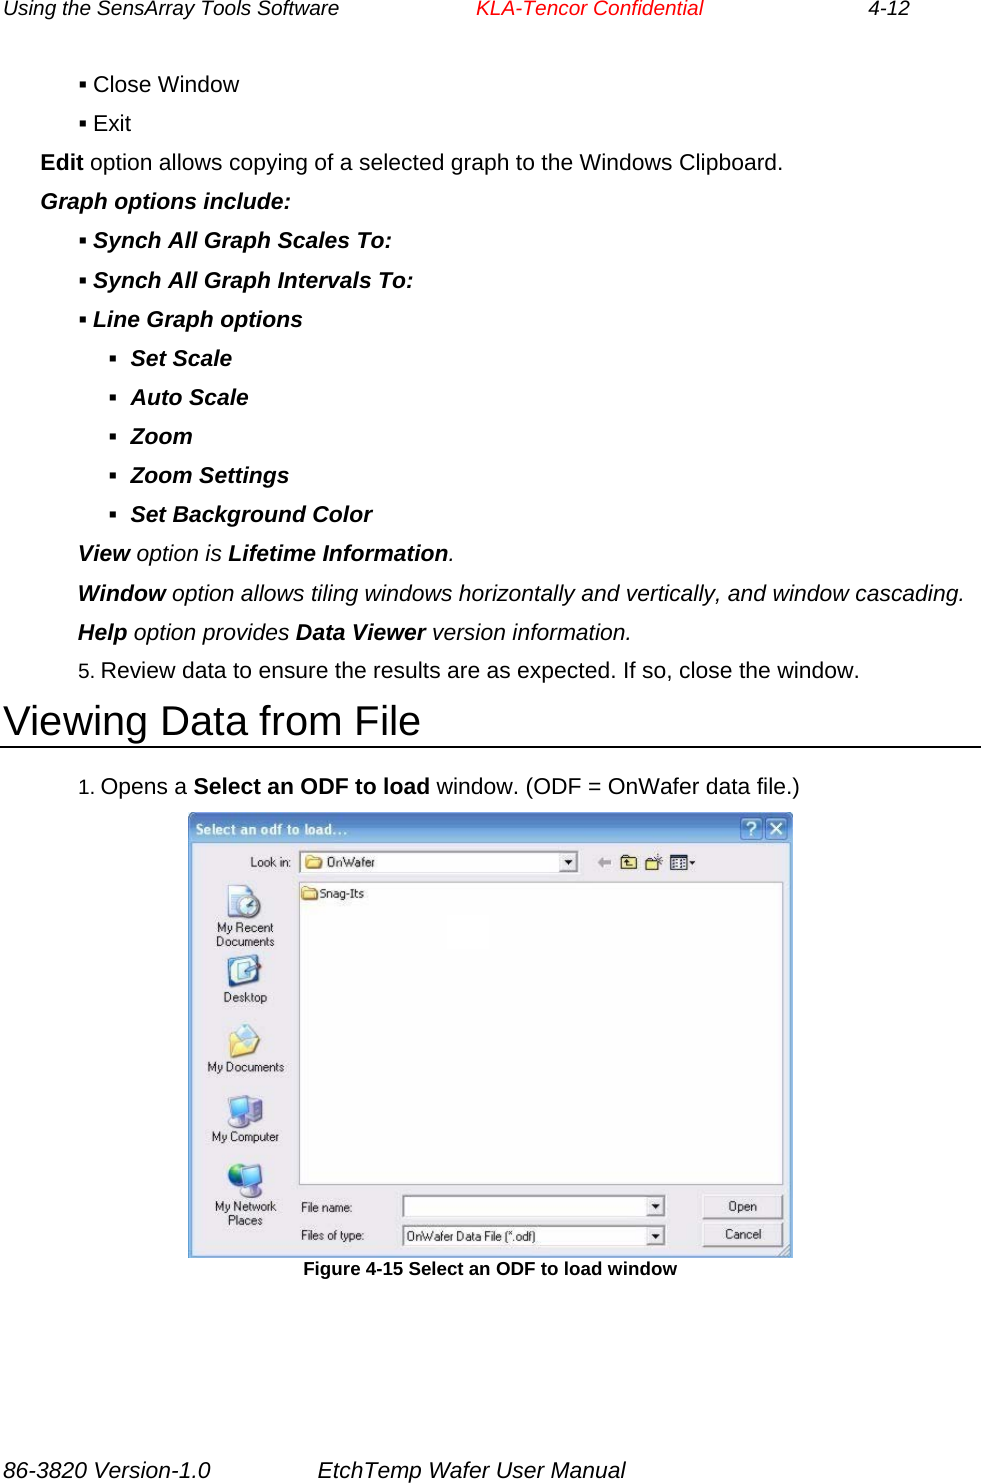 Using the SensArray Tools Software        KLA-Tencor Confidential             4-12  Close Window  Exit Edit option allows copying of a selected graph to the Windows Clipboard. Graph options include:  Synch All Graph Scales To:  Synch All Graph Intervals To:  Line Graph options  Set Scale  Auto Scale  Zoom  Zoom Settings  Set Background Color View option is Lifetime Information. Window option allows tiling windows horizontally and vertically, and window cascading. Help option provides Data Viewer version information. 5. Review data to ensure the results are as expected. If so, close the window. Viewing Data from File 1. Opens a Select an ODF to load window. (ODF = OnWafer data file.)  Figure 4-15 Select an ODF to load window 86-3820 Version-1.0  EtchTemp Wafer User Manual 